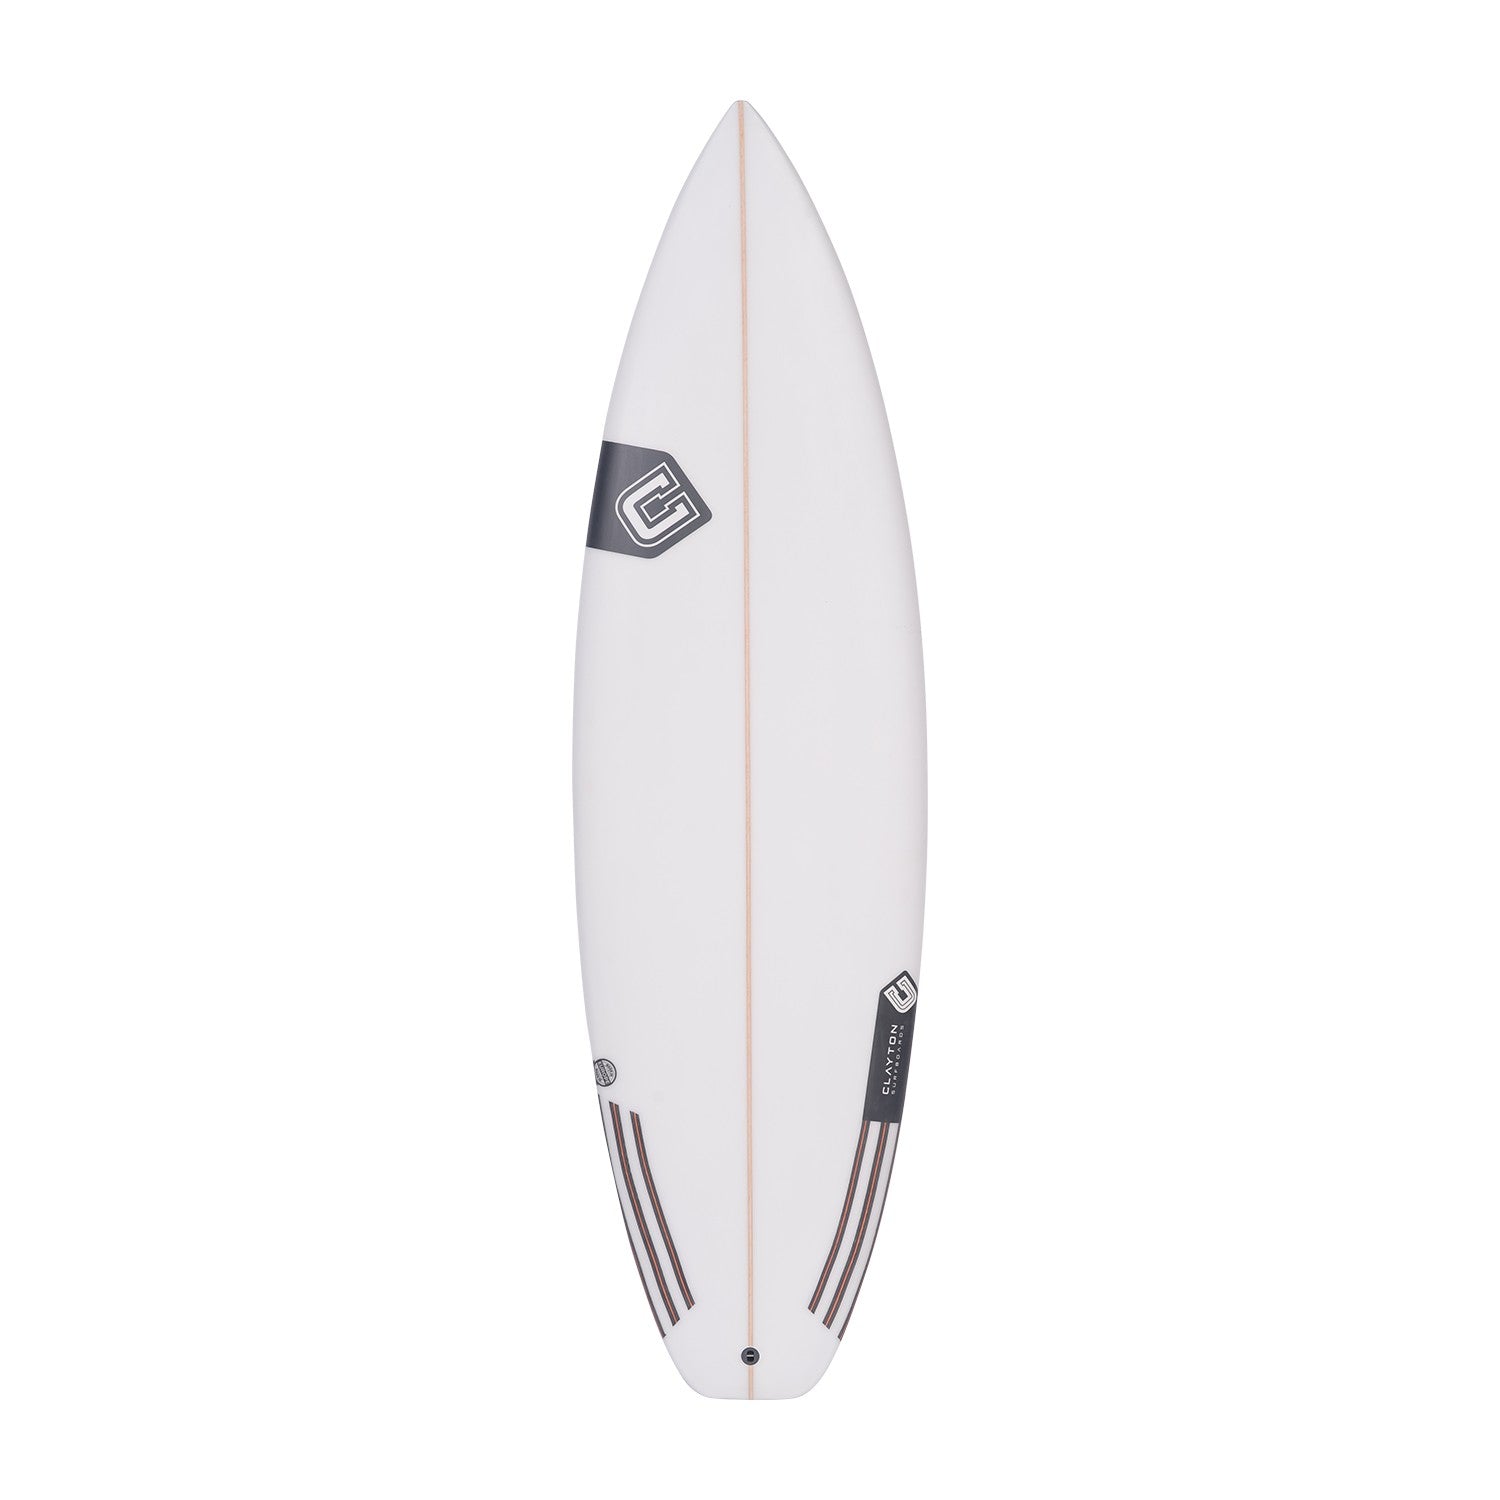 CLAYTON Surfboards - Trickster (PU) Futures - 5'8